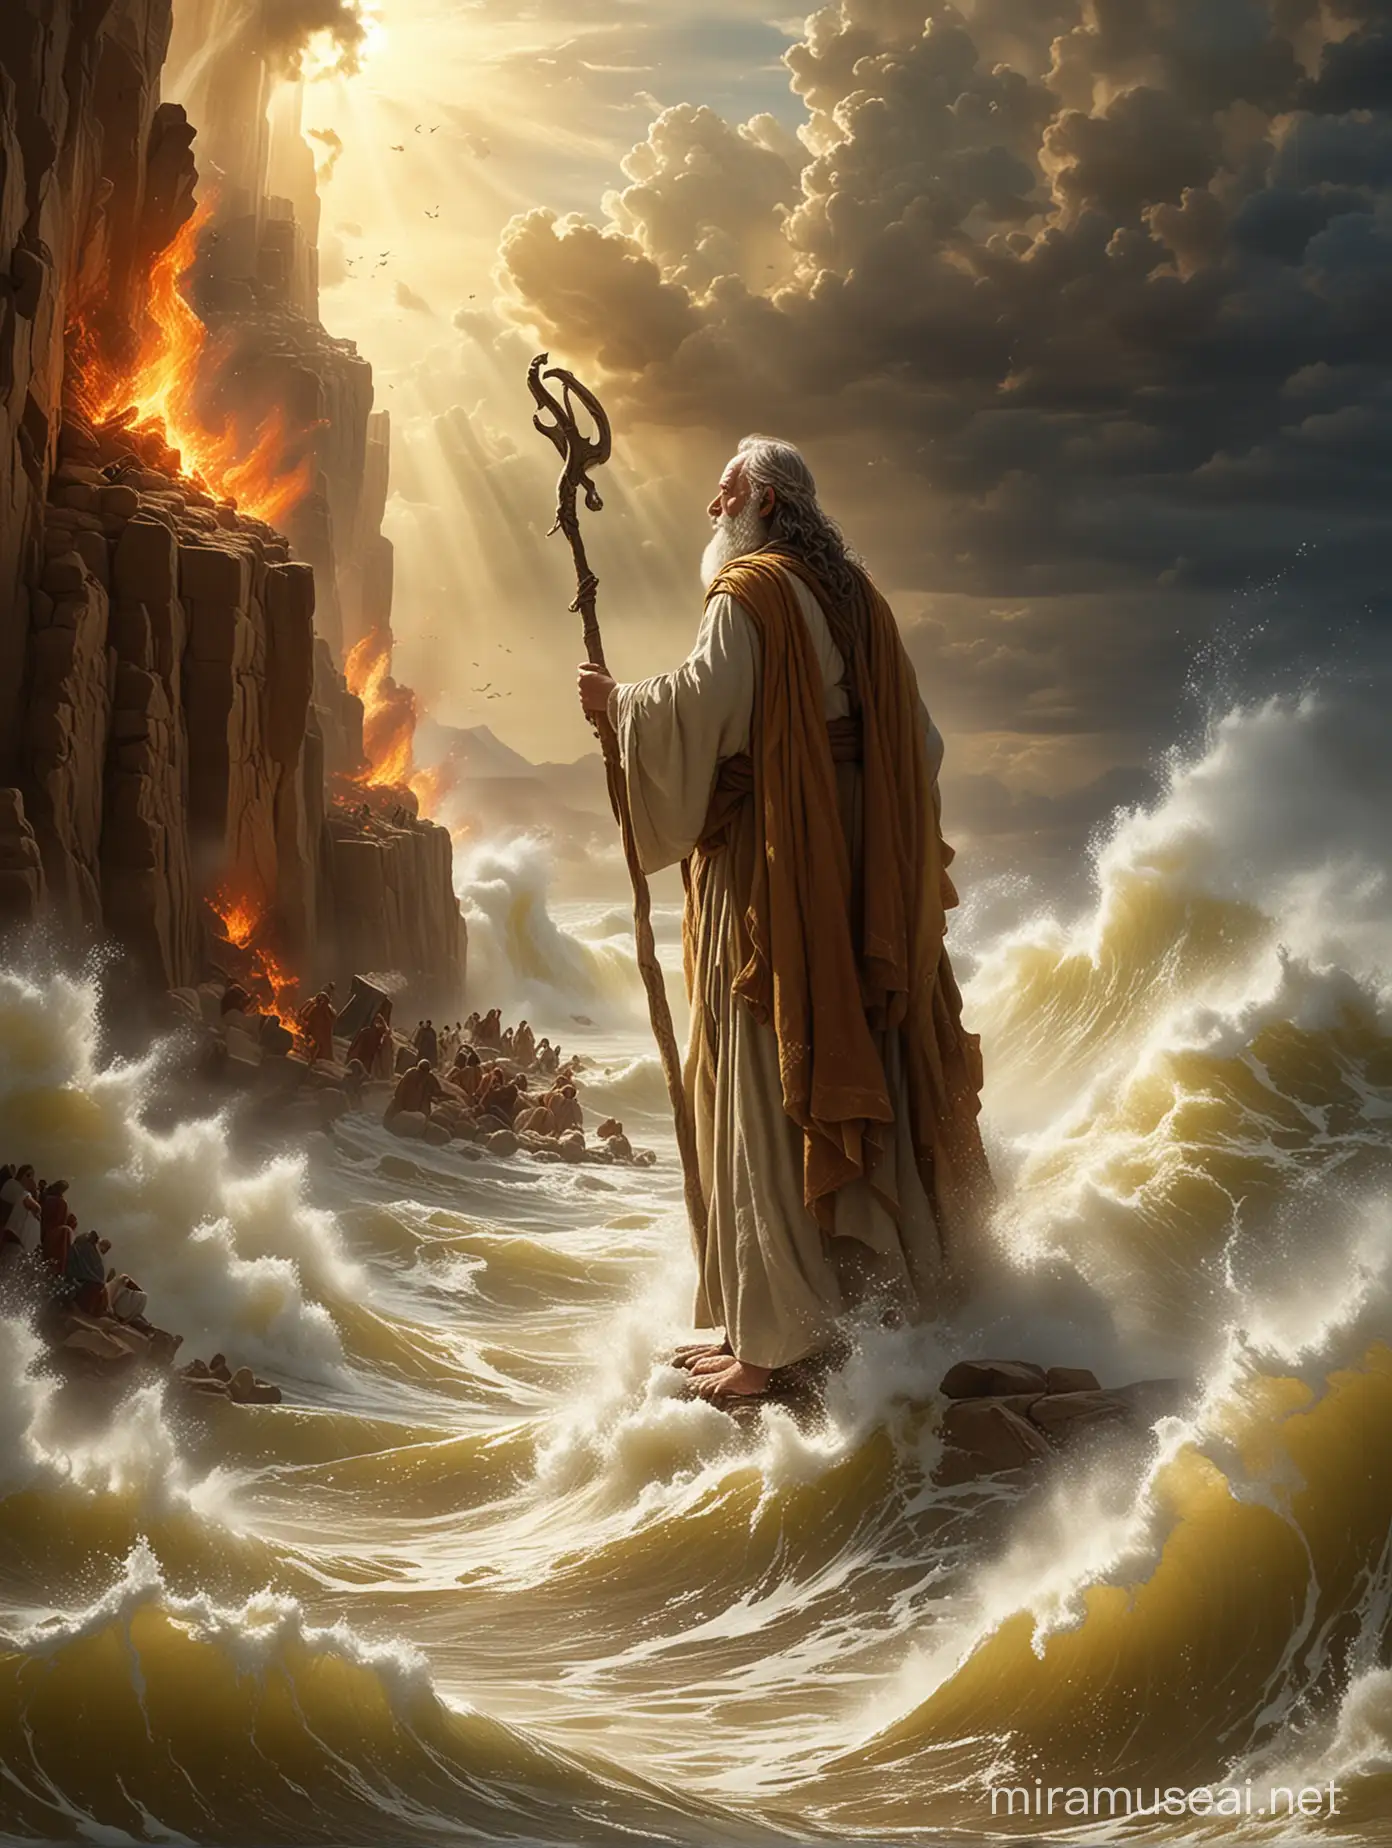 Create a vivid scene depicting the prophet Moses in a side view, standing on a hill, parting the sea, with towering water waves on either side and the Israelites crossing the dry sea floor, guided by a pillar of fire or cloud. Capture the awe-inspiring moment when Moses raises his staff to command the waters to part, and convey the emotions of hope, faith, and divine intervention